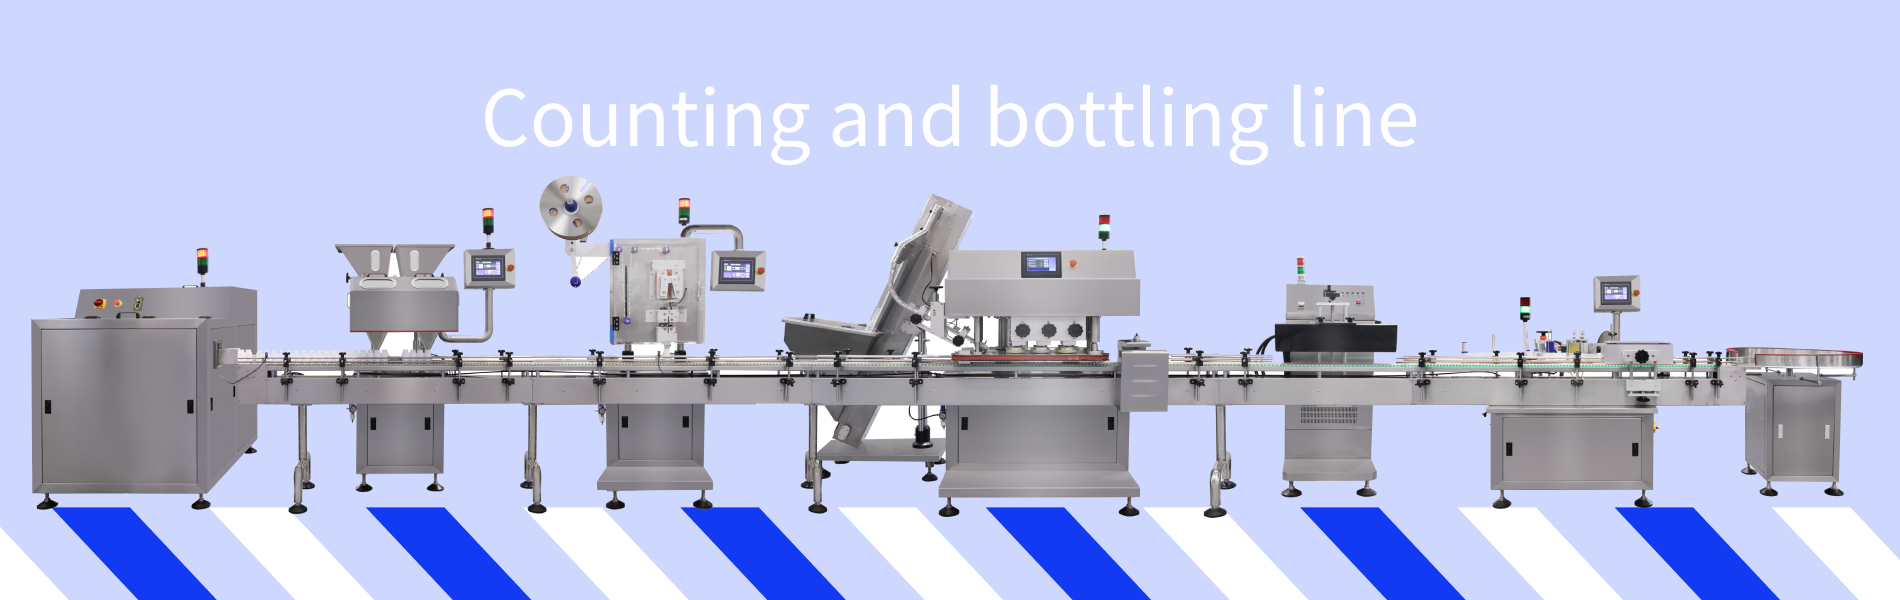 Counting and bottling line